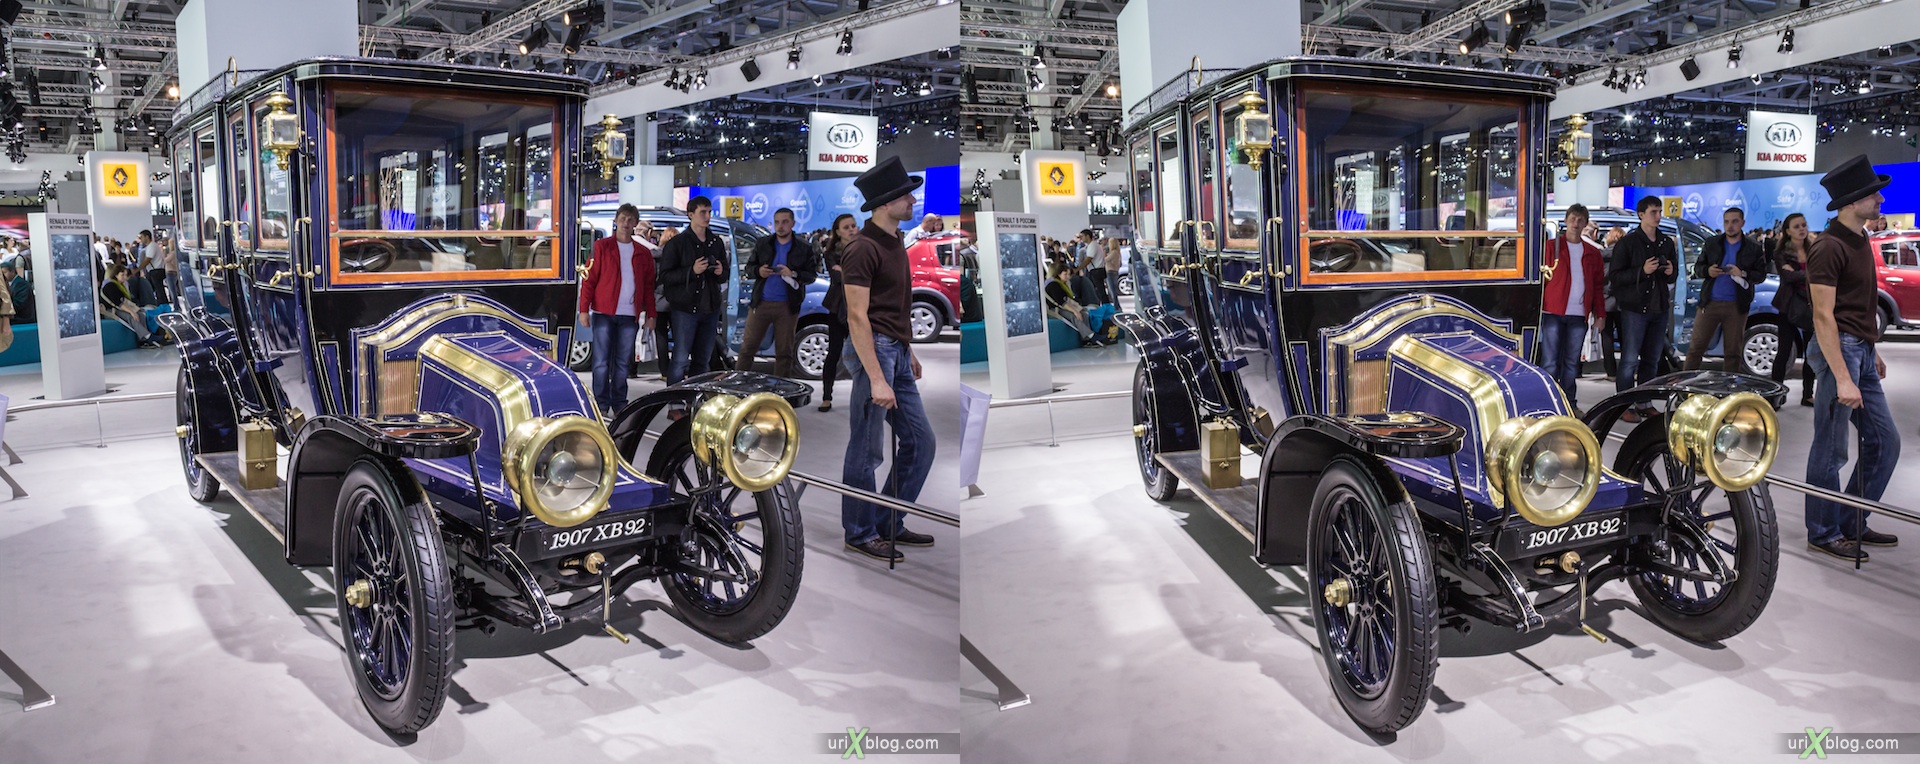 2012, Renault 1907 XB92, Moscow International Automobile Salon, auto show, 3D, stereo pair, cross-eyed, crossview